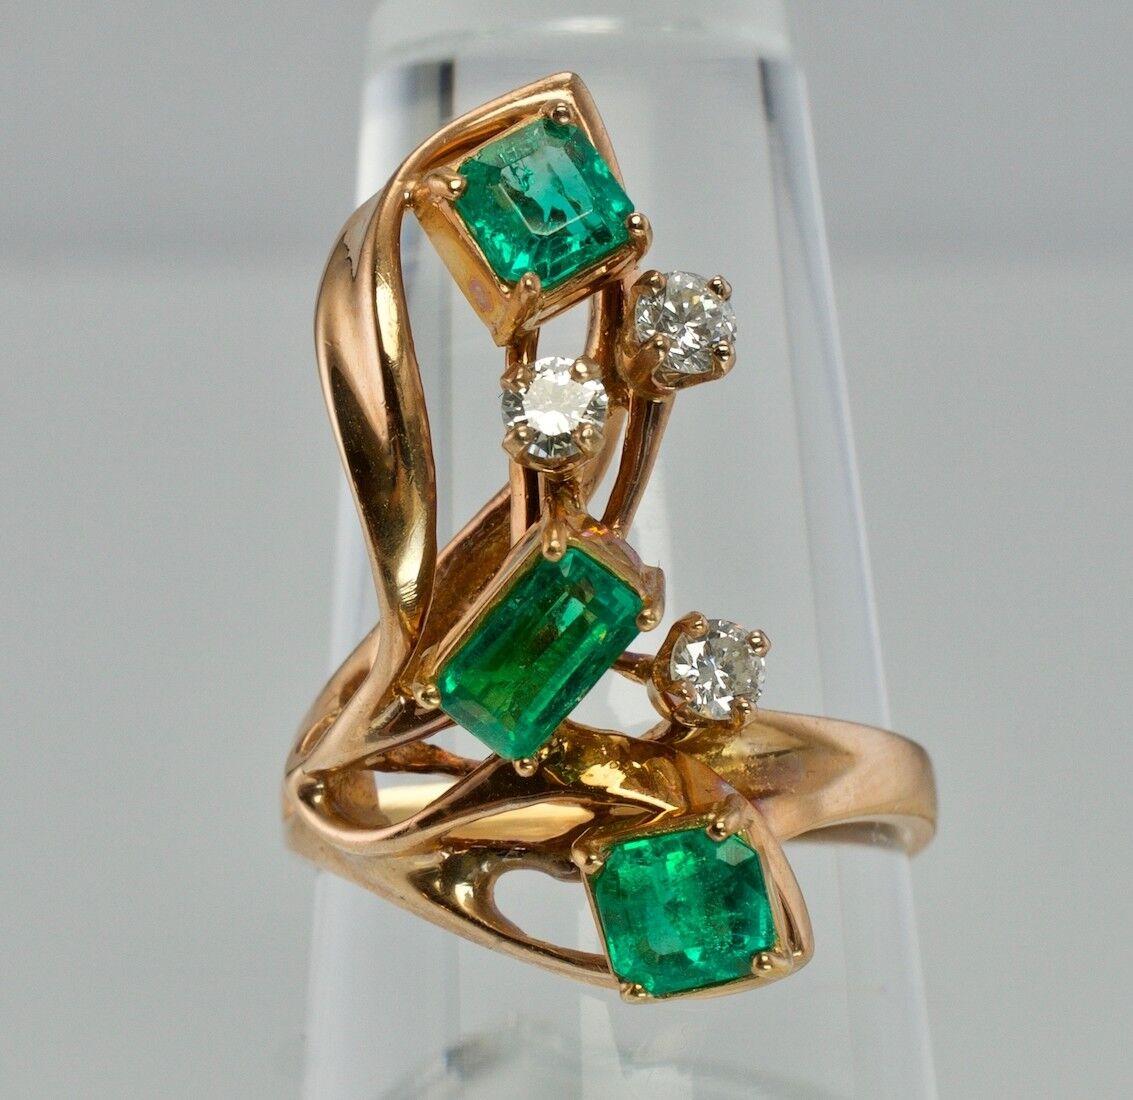 Diamond Colombian Emerald Ring 14K Rose Gold Vintage

This spectacular vintage treasure is finely crafted in solid 14K Rose gold and set with high-quality Colombian Emeralds and diamonds. It is hallmarked with 